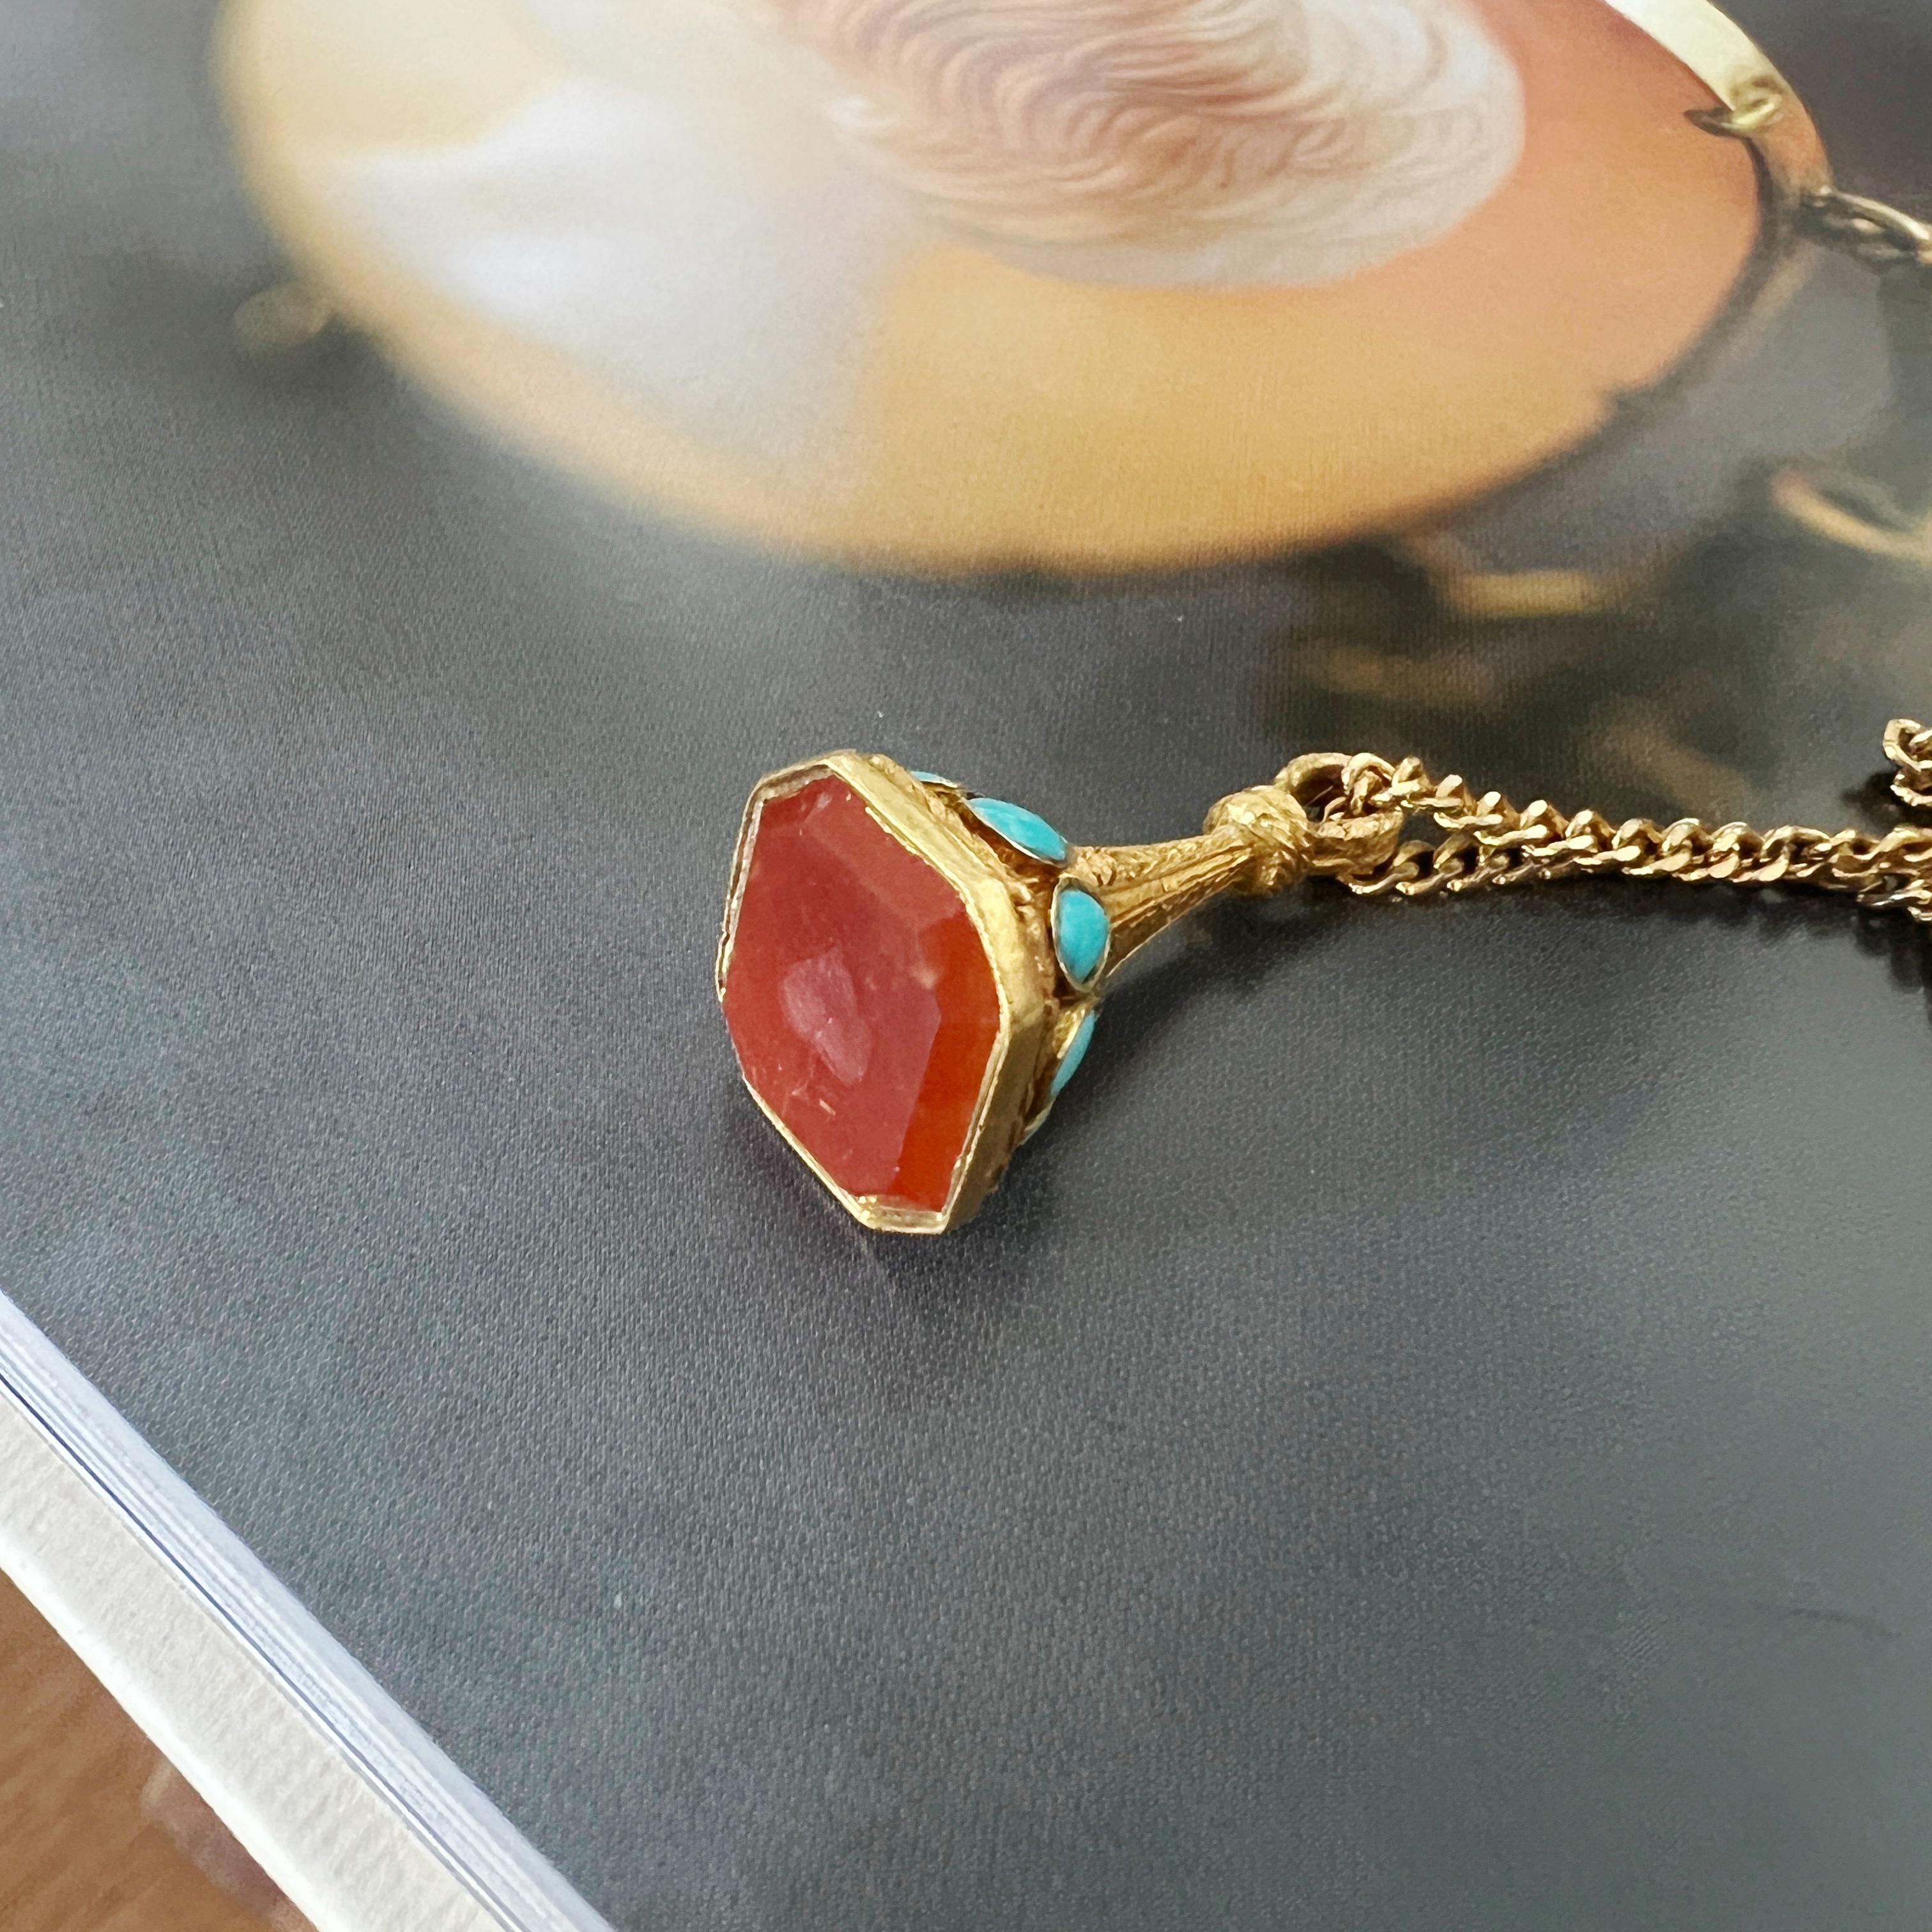 Women's or Men's Antique 18K gold turquoise carnelian seal fob pendant “as free as a leaf” For Sale